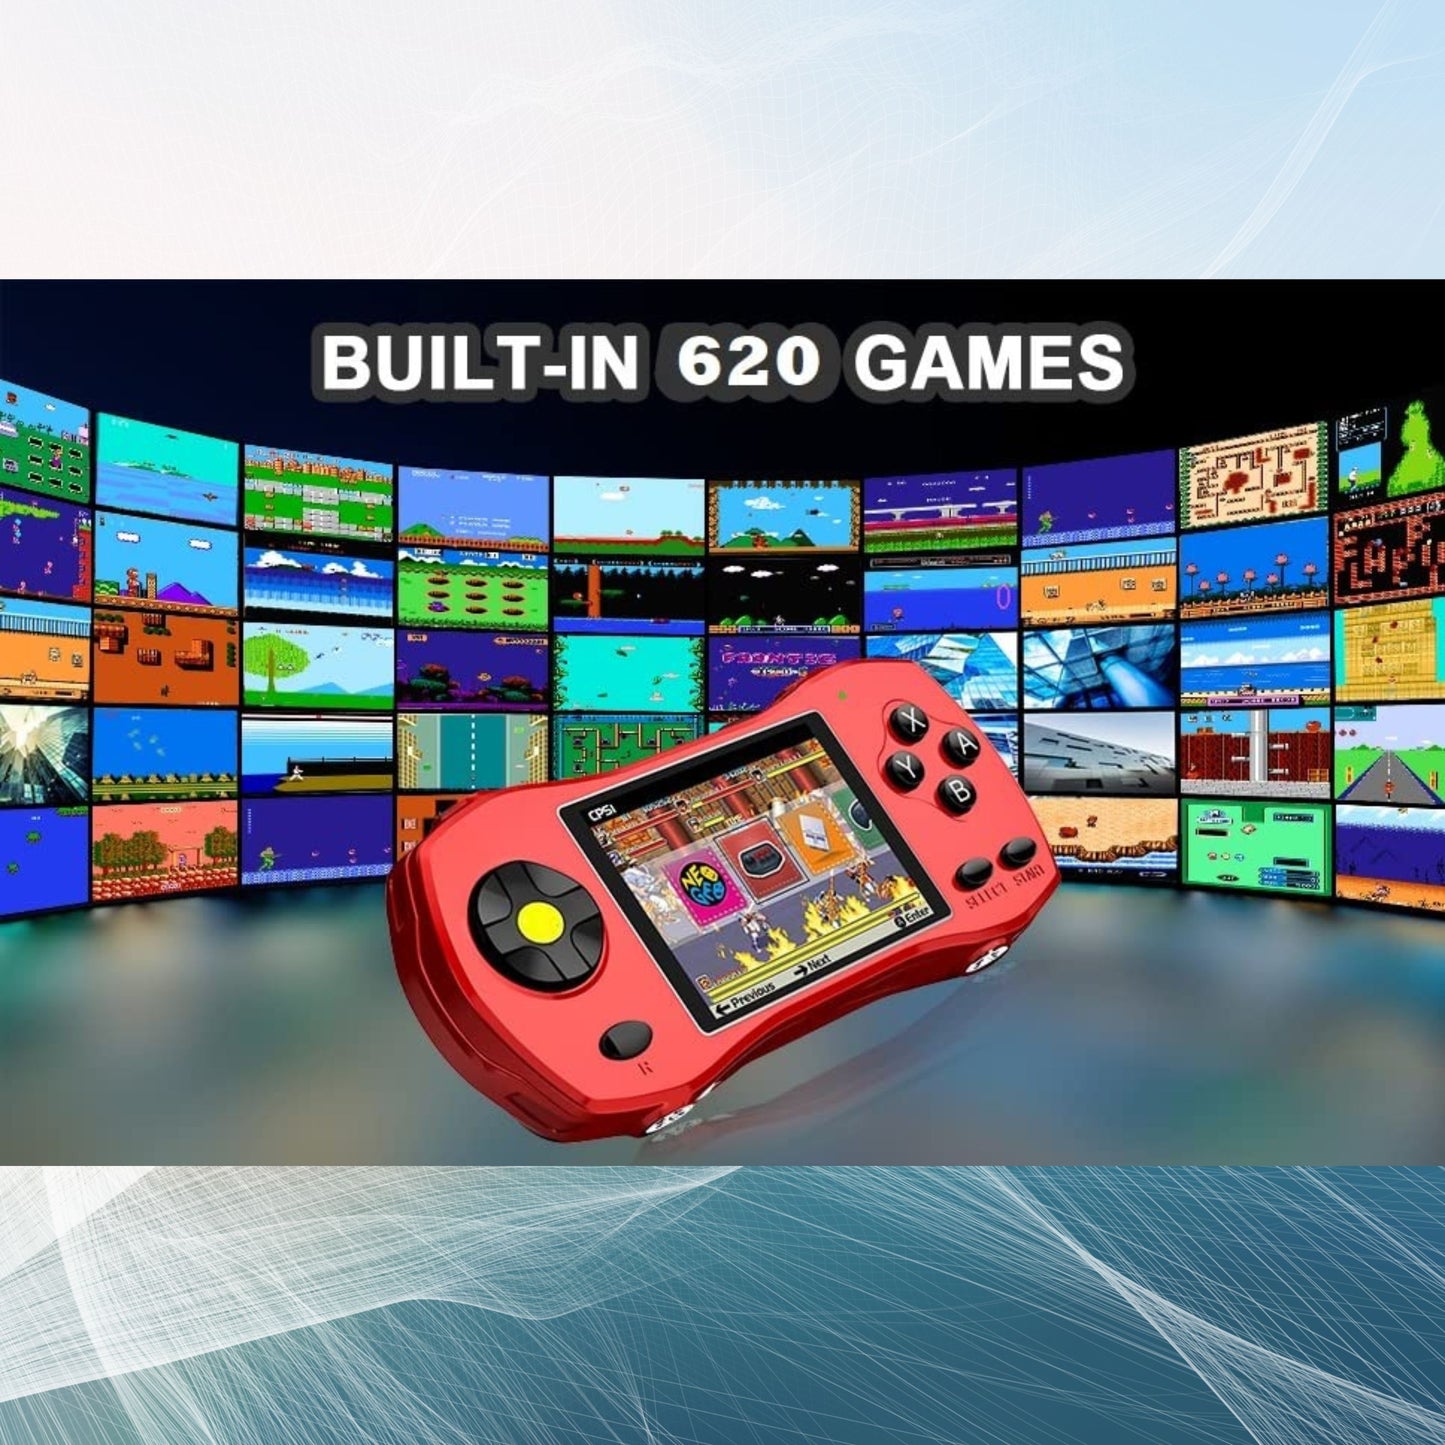 Advance Video Game With 620 Built in Kids Games